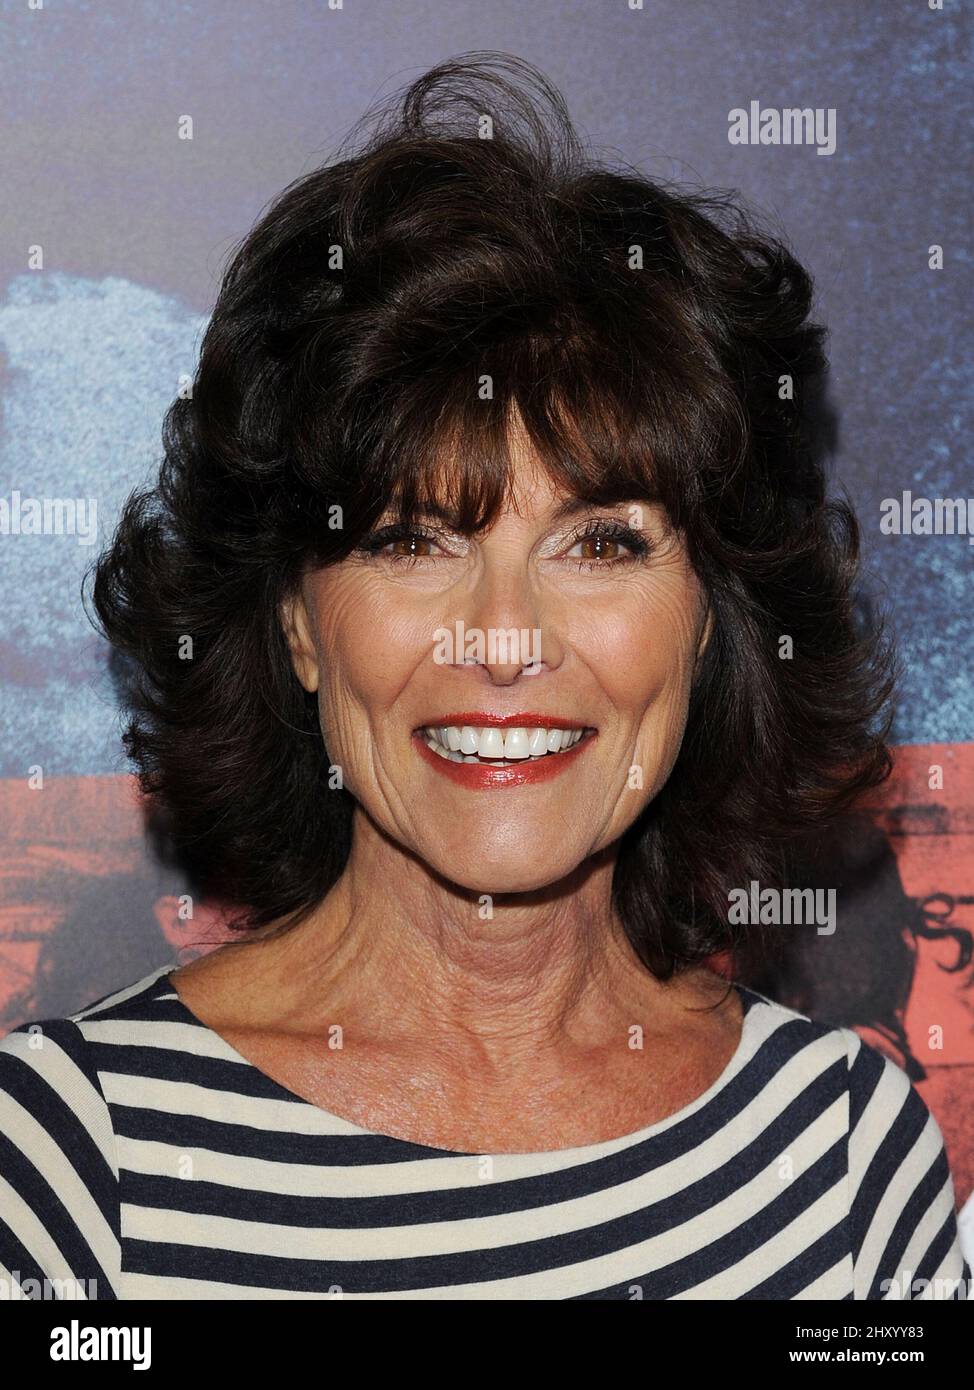 Adrienne Barbeau attends the 'Argo' Los Angeles Premiere held at the Academy of Motion Picture Arts and Sciences, California. Stock Photo